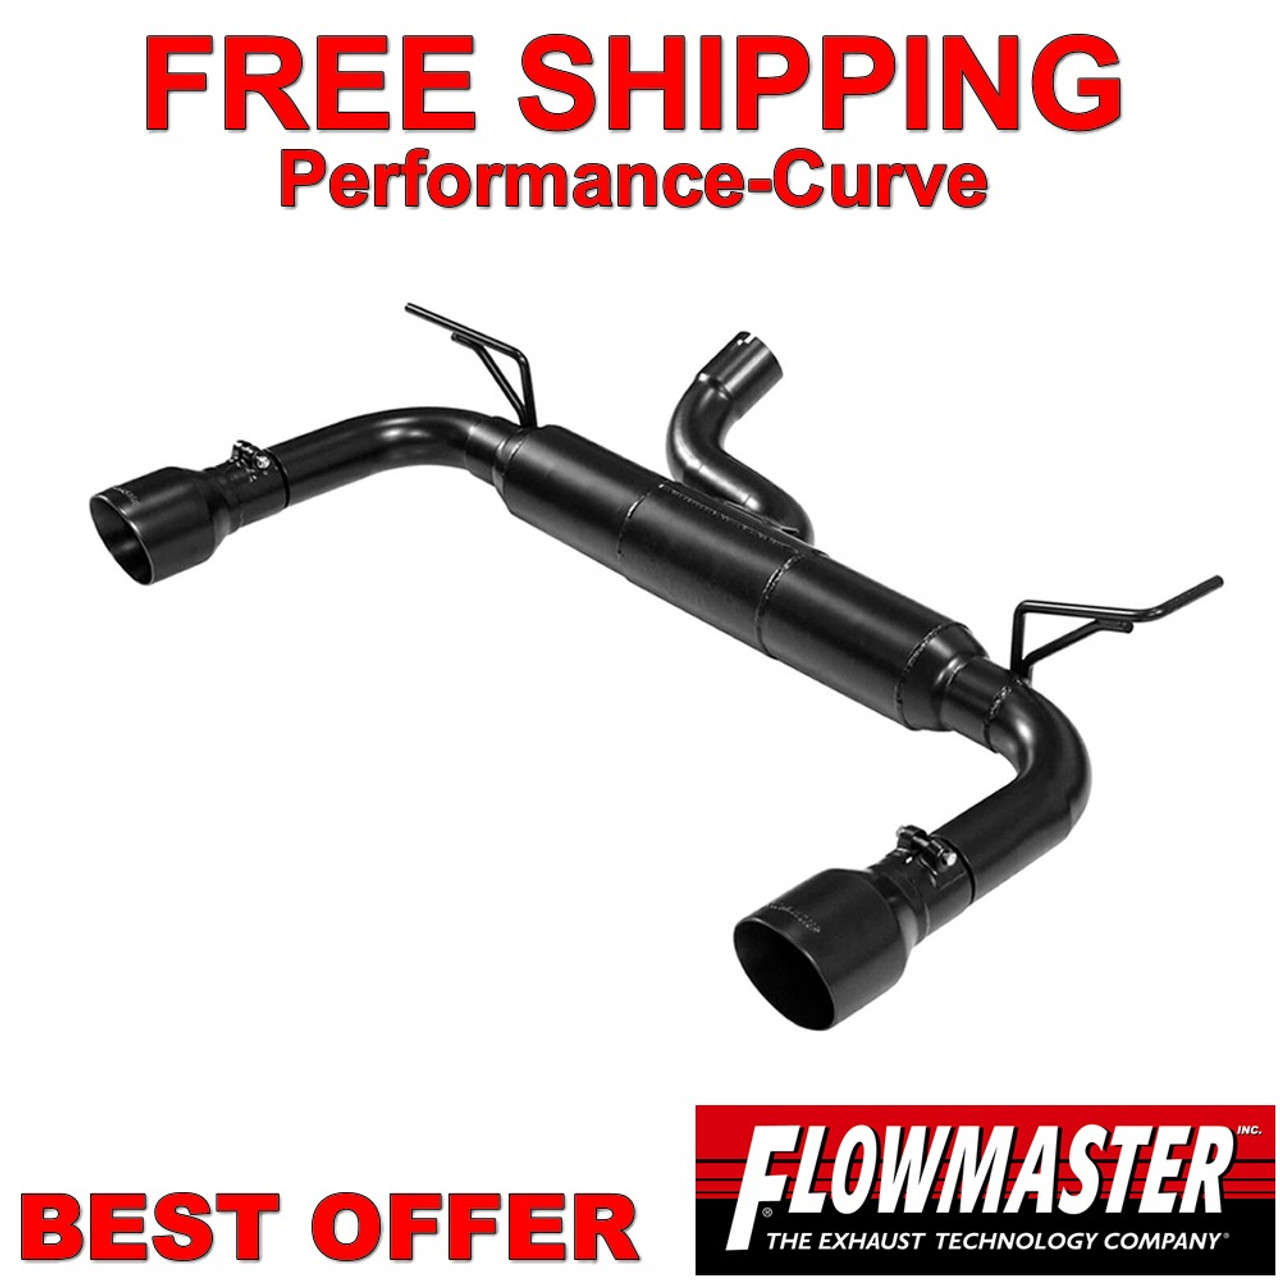 Flowmaster Force II Exhaust System fits 07-11 Jeep Wrangler JK  - 817755  - Performance-Curve